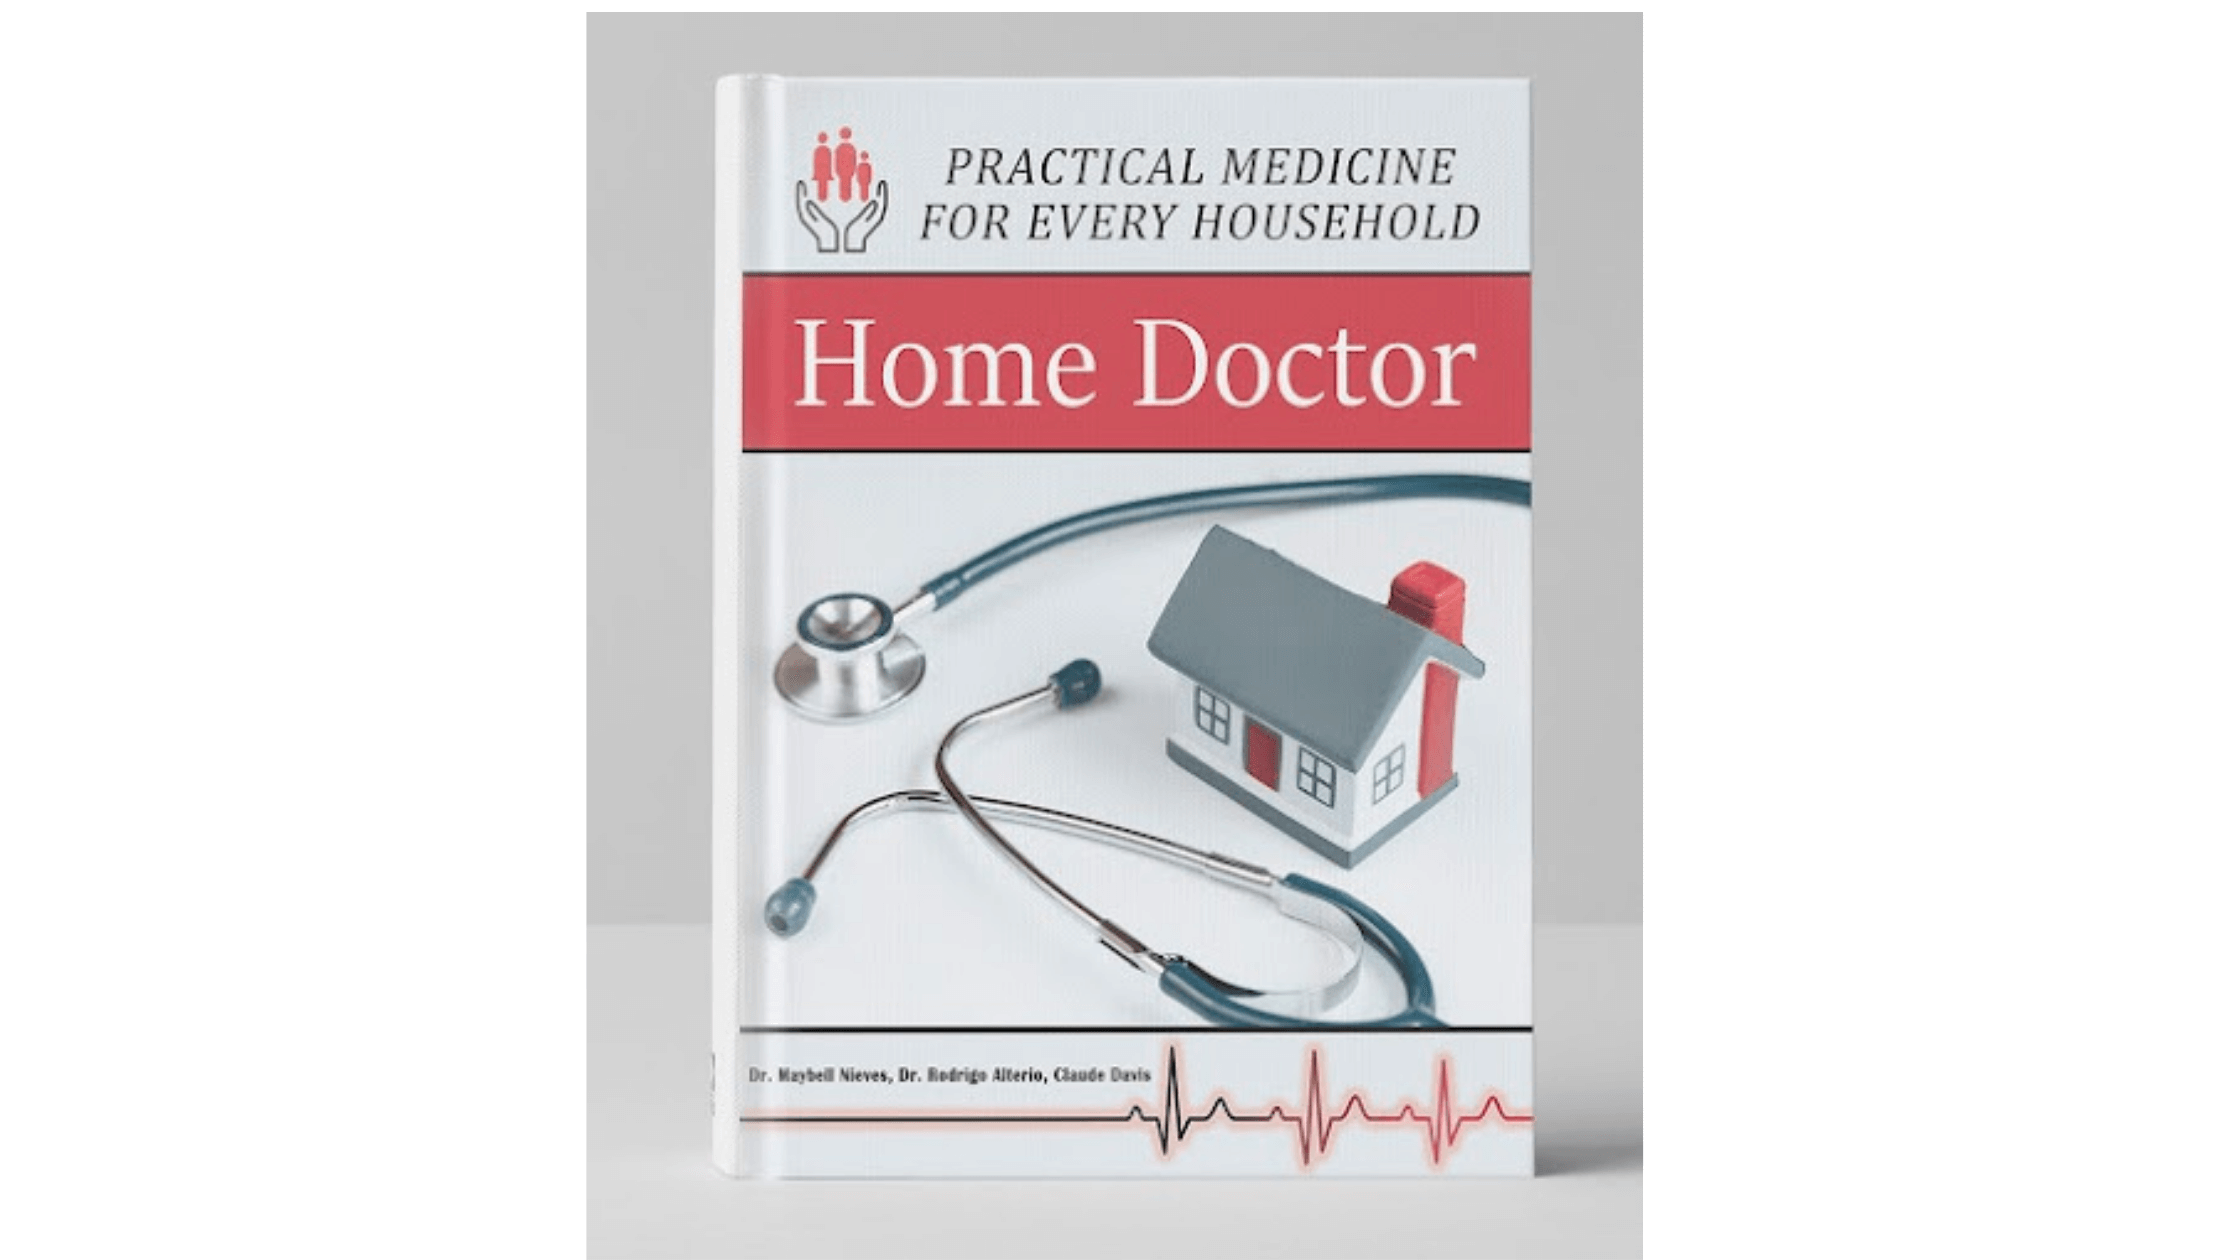 The Home Doctor Guide Reviews
